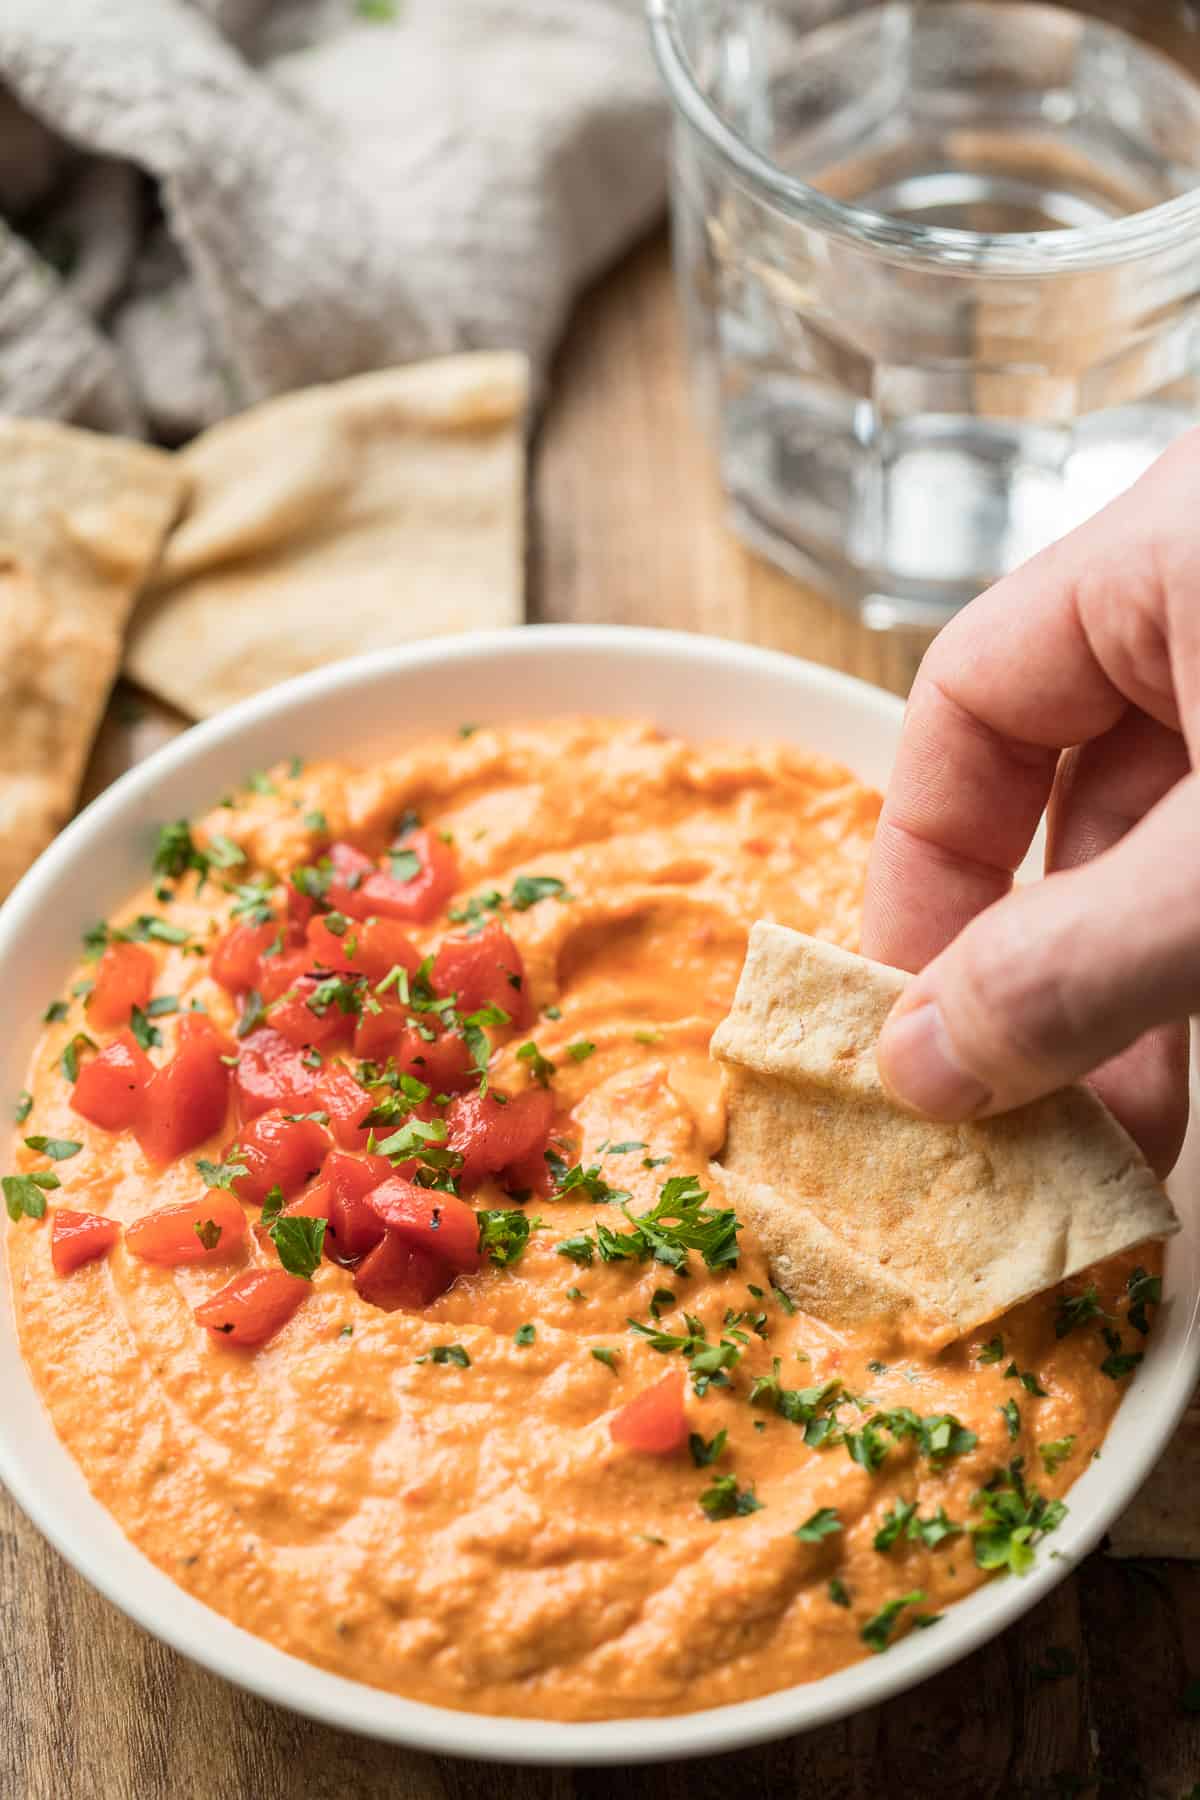 Hand Dipping a Pita Wedge into a Bowl of Roasted Red Pepper Hummus